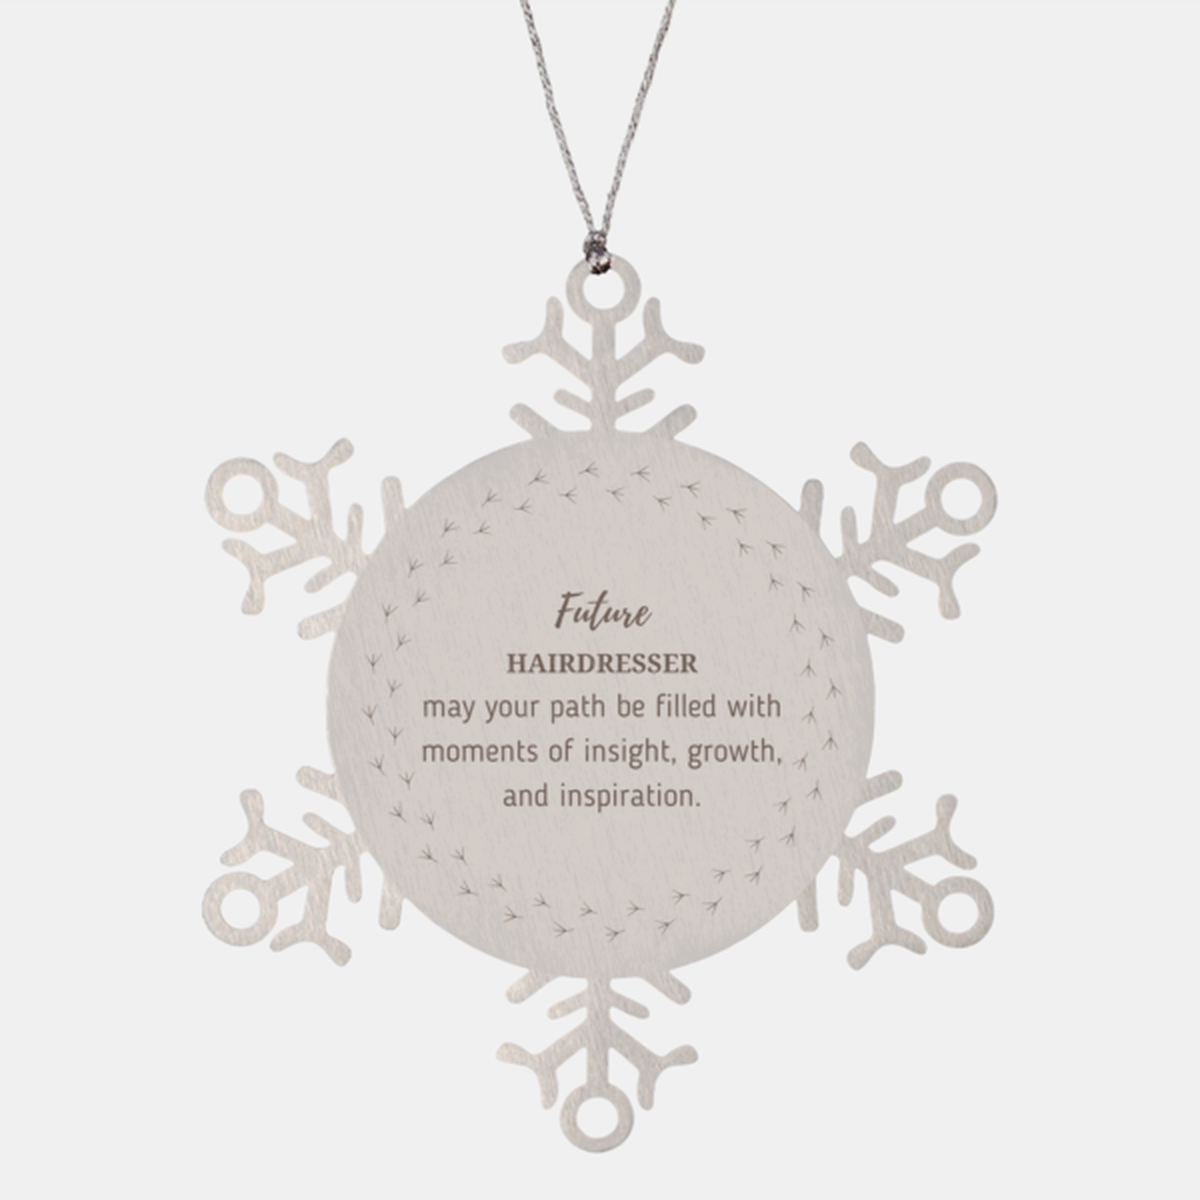 Future Hairdresser Gifts, May your path be filled with moments of insight, Graduation Gifts for New Hairdresser, Christmas Unique Snowflake Ornament For Men, Women, Friends